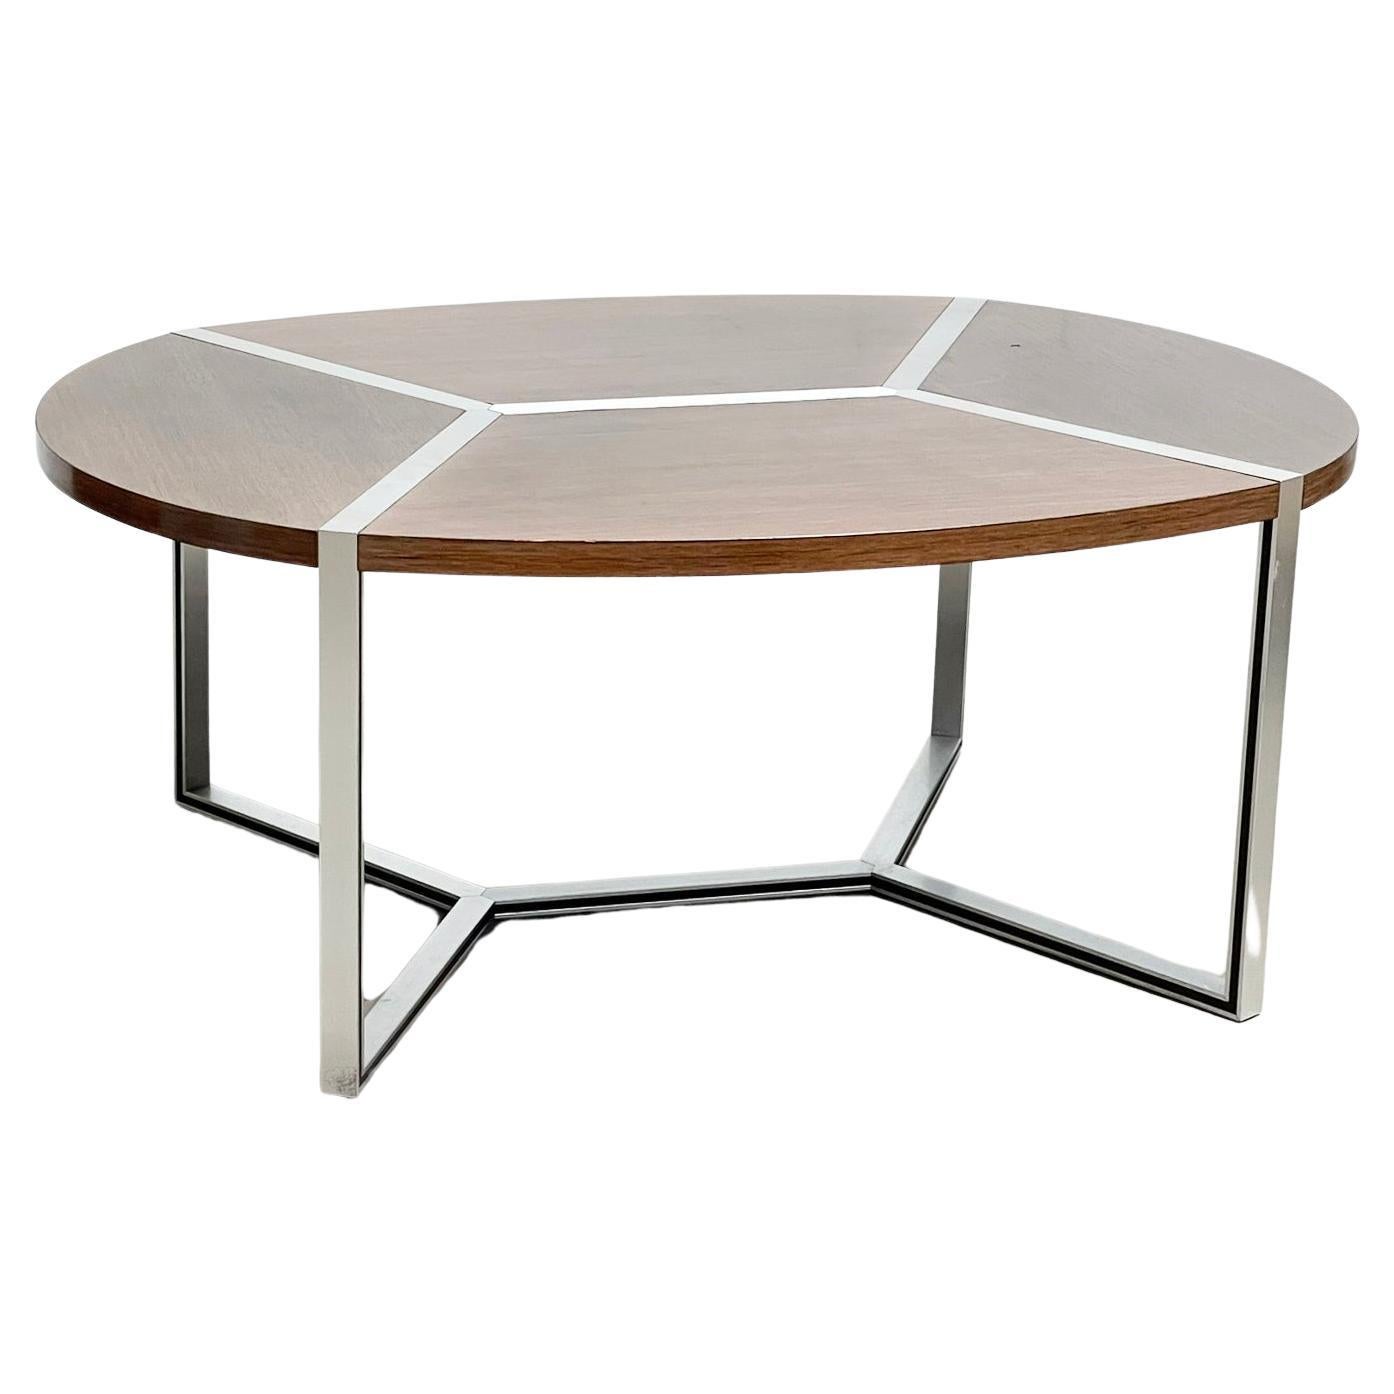 Geometrical Ligne Roset dining table designed by Henri Lesetre and Claude Gailla For Sale